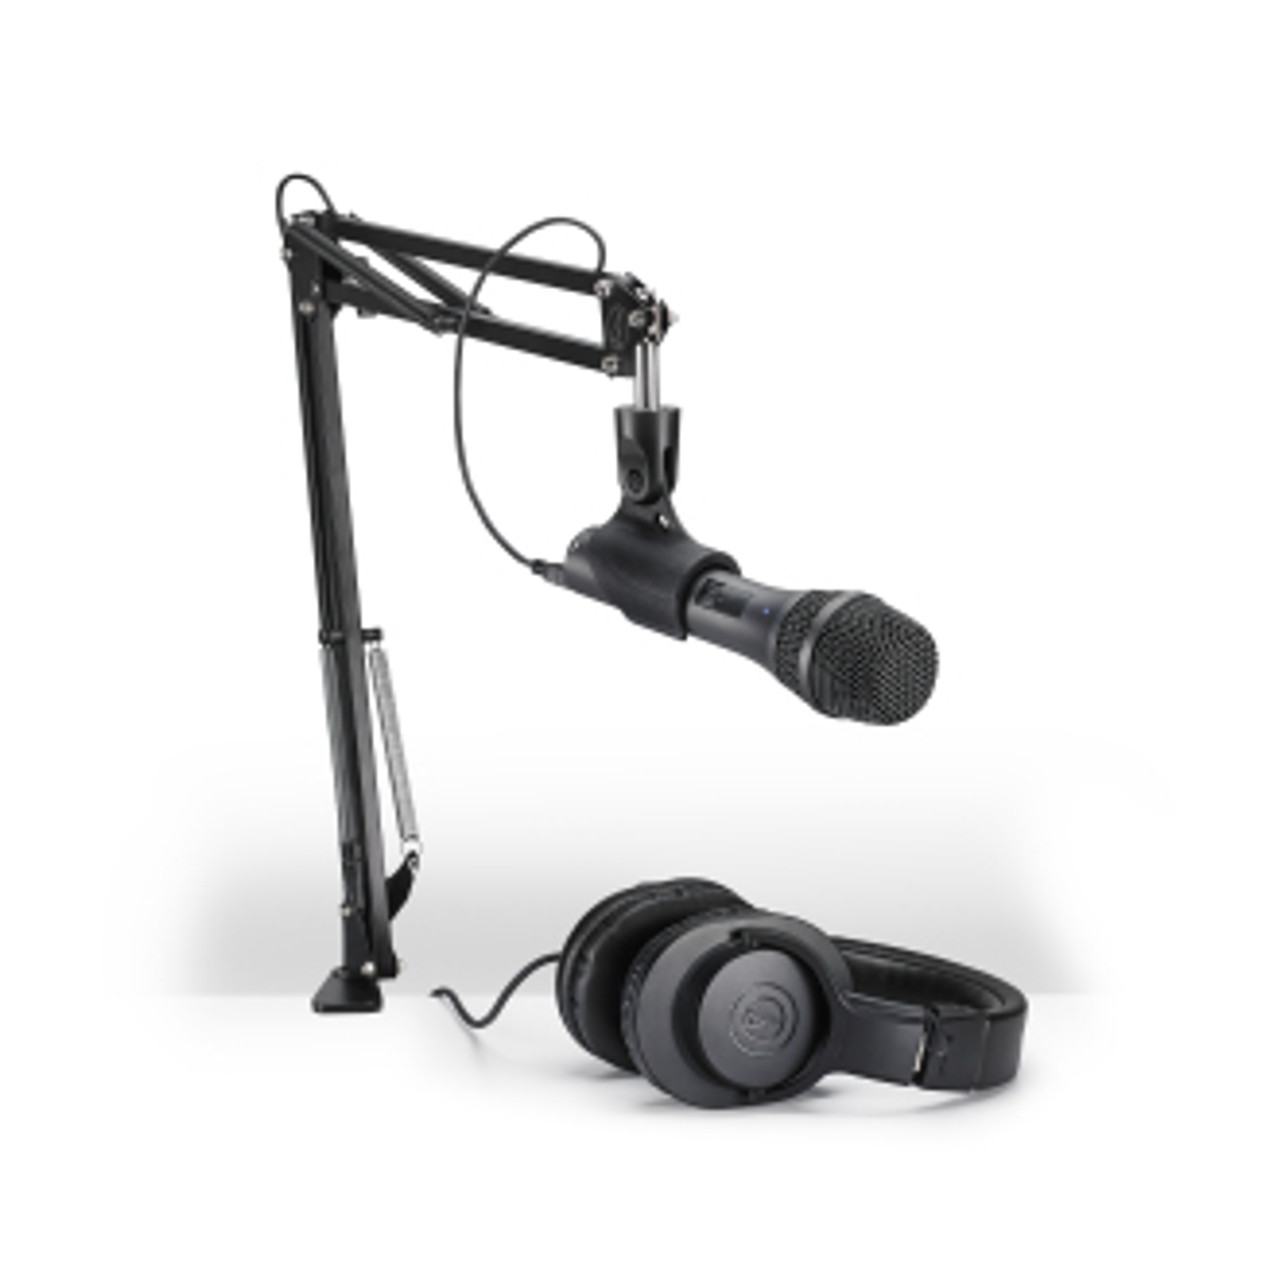 Audio-Technica AT2005USBPK Streamcasting Podcasting Package with AT2005USB mic +M20X headphone (B-STOCK)